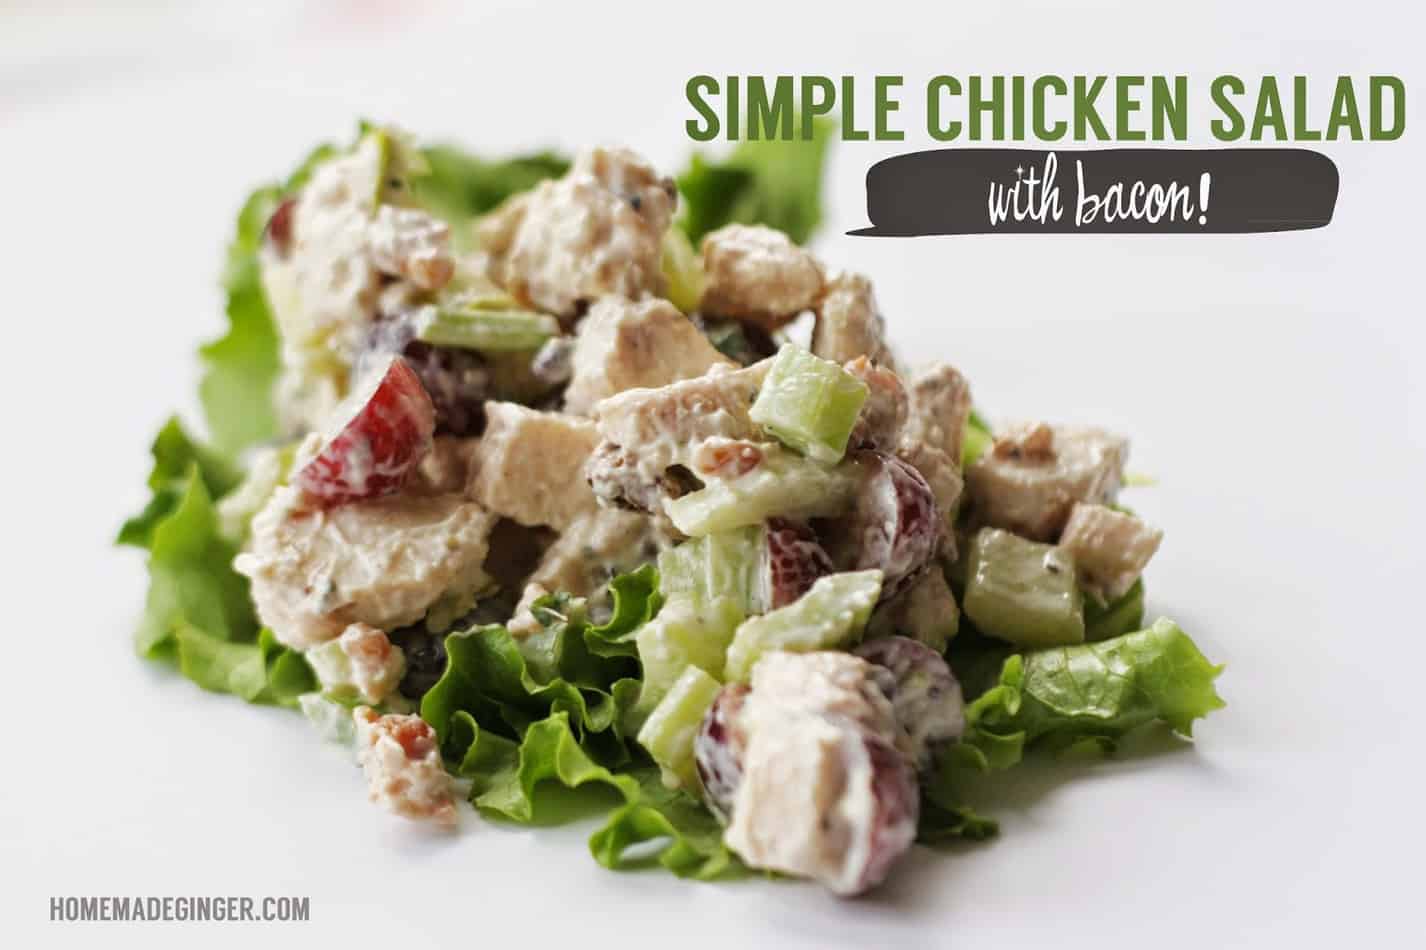 Simple Chicken Salad With Bacon! Recipe - Homemade Ginger